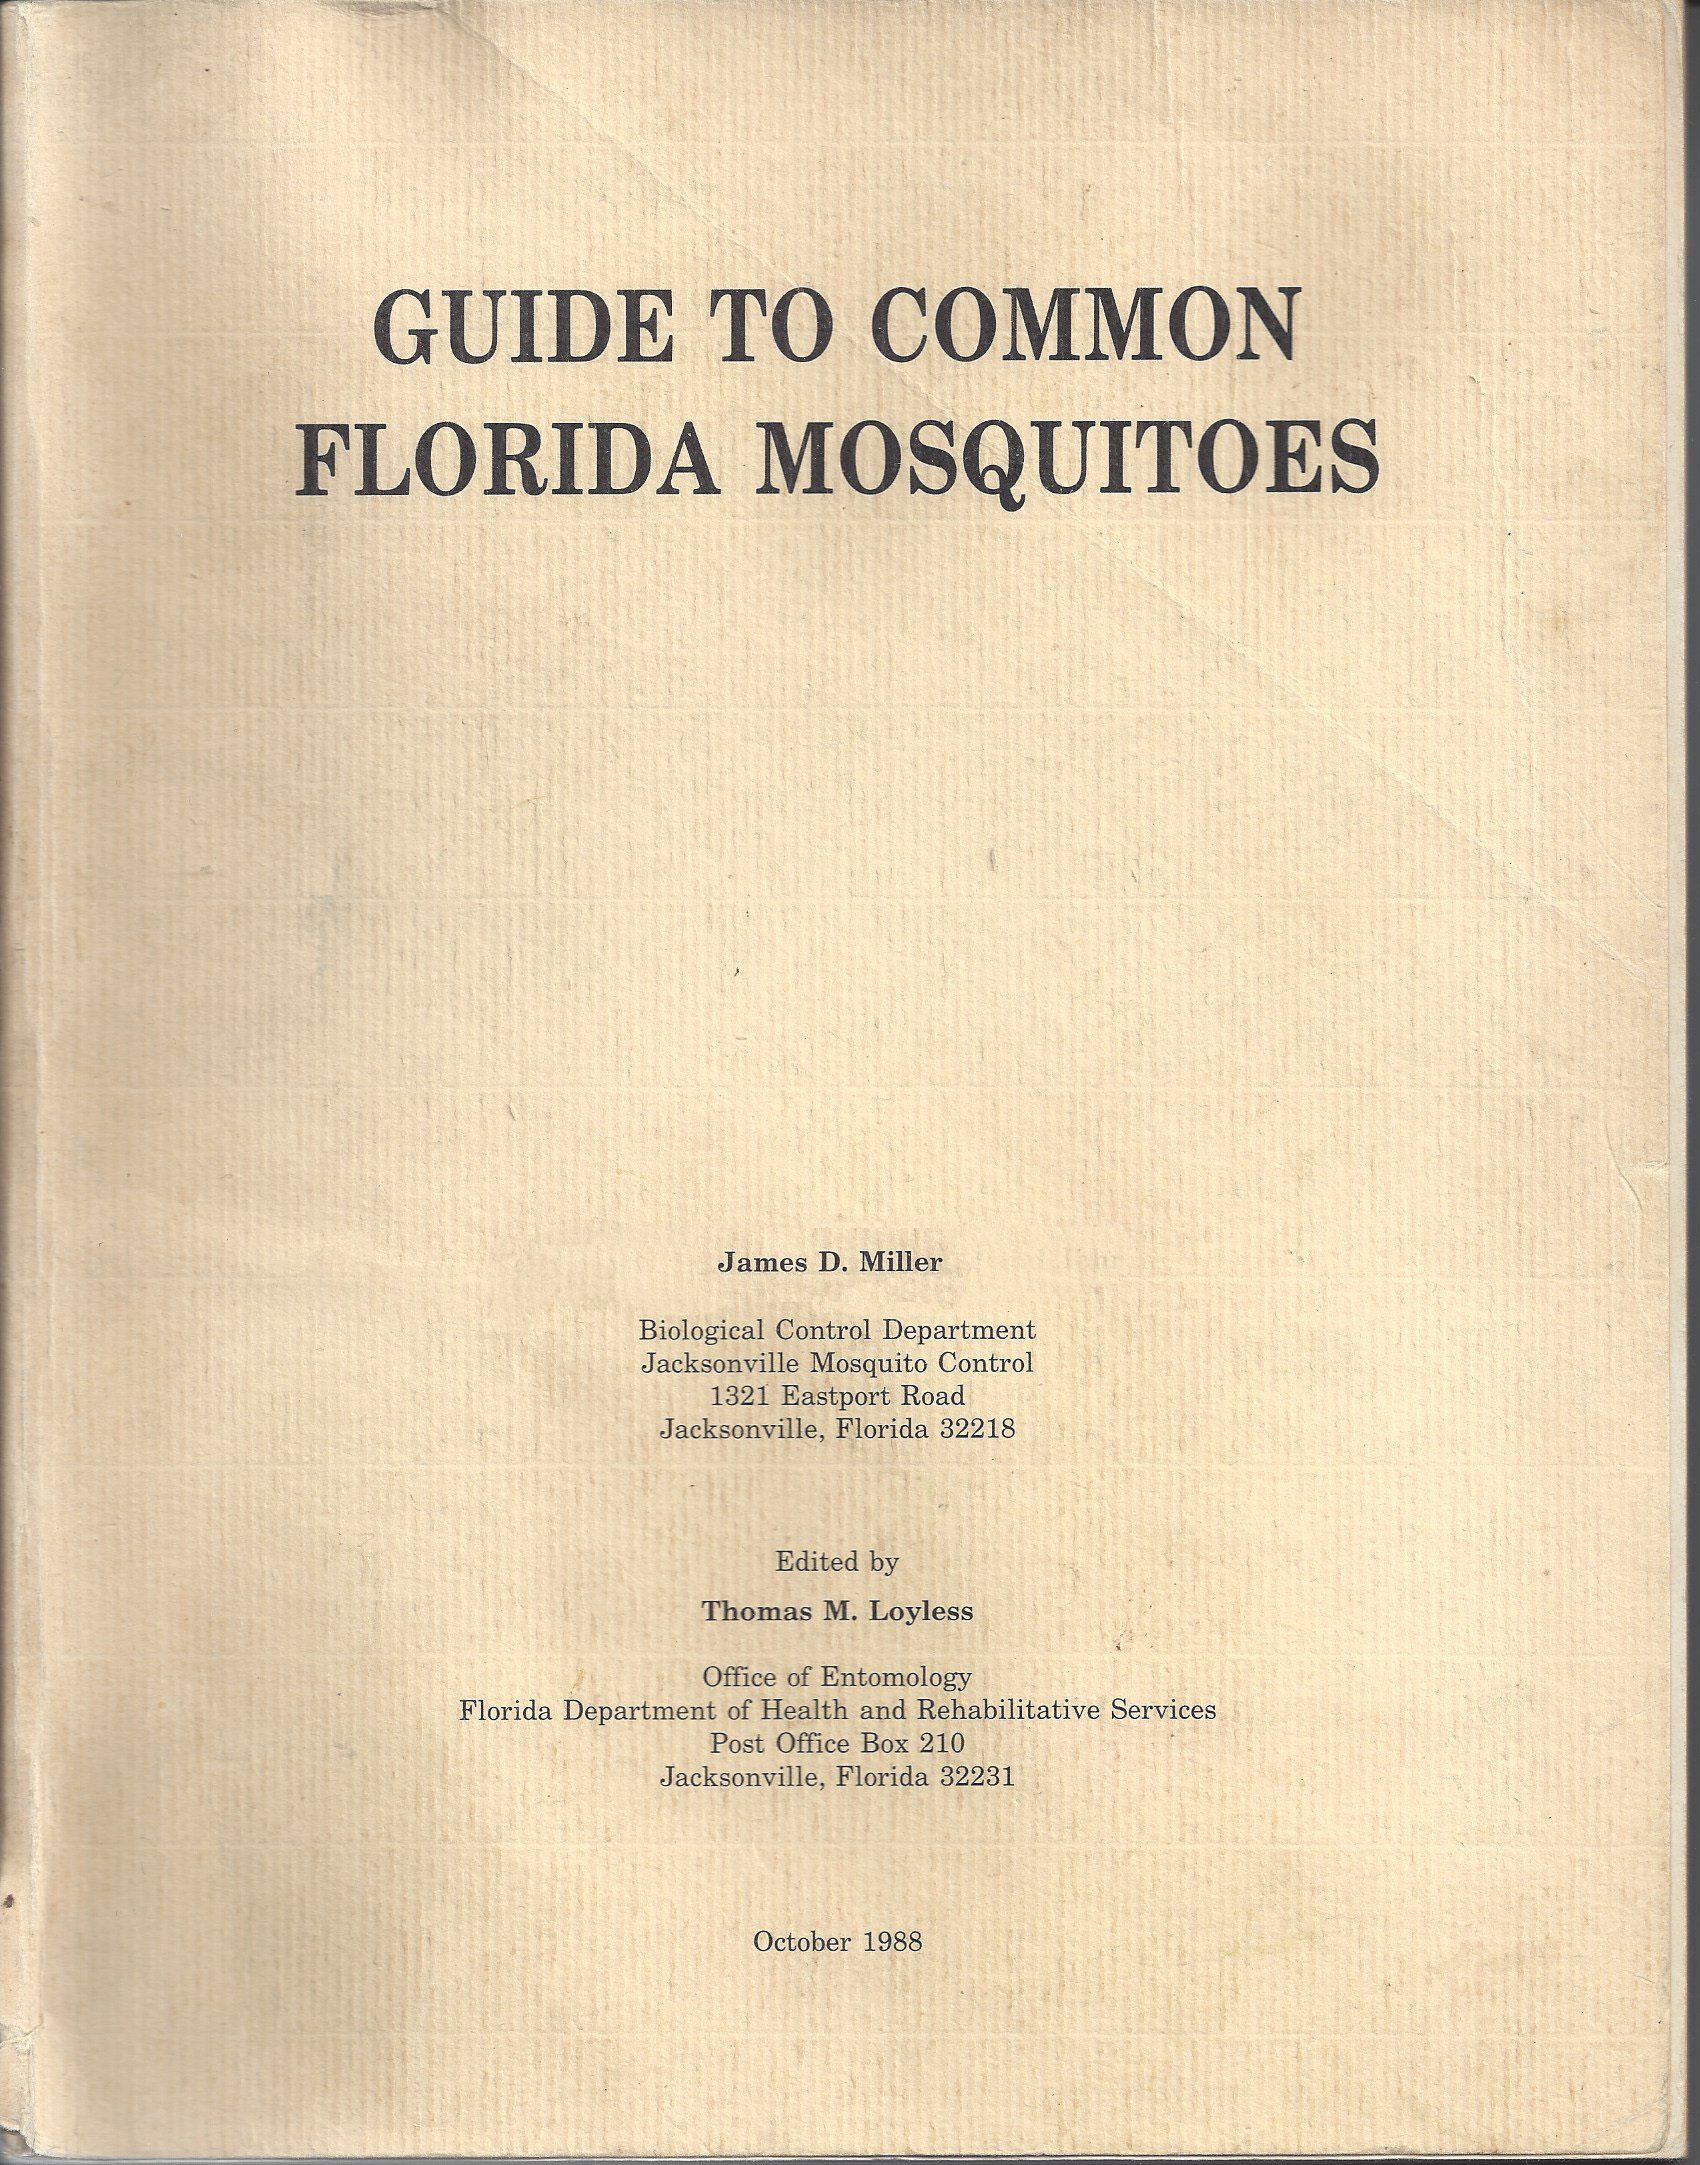 Guide to common Florida mosquitoes